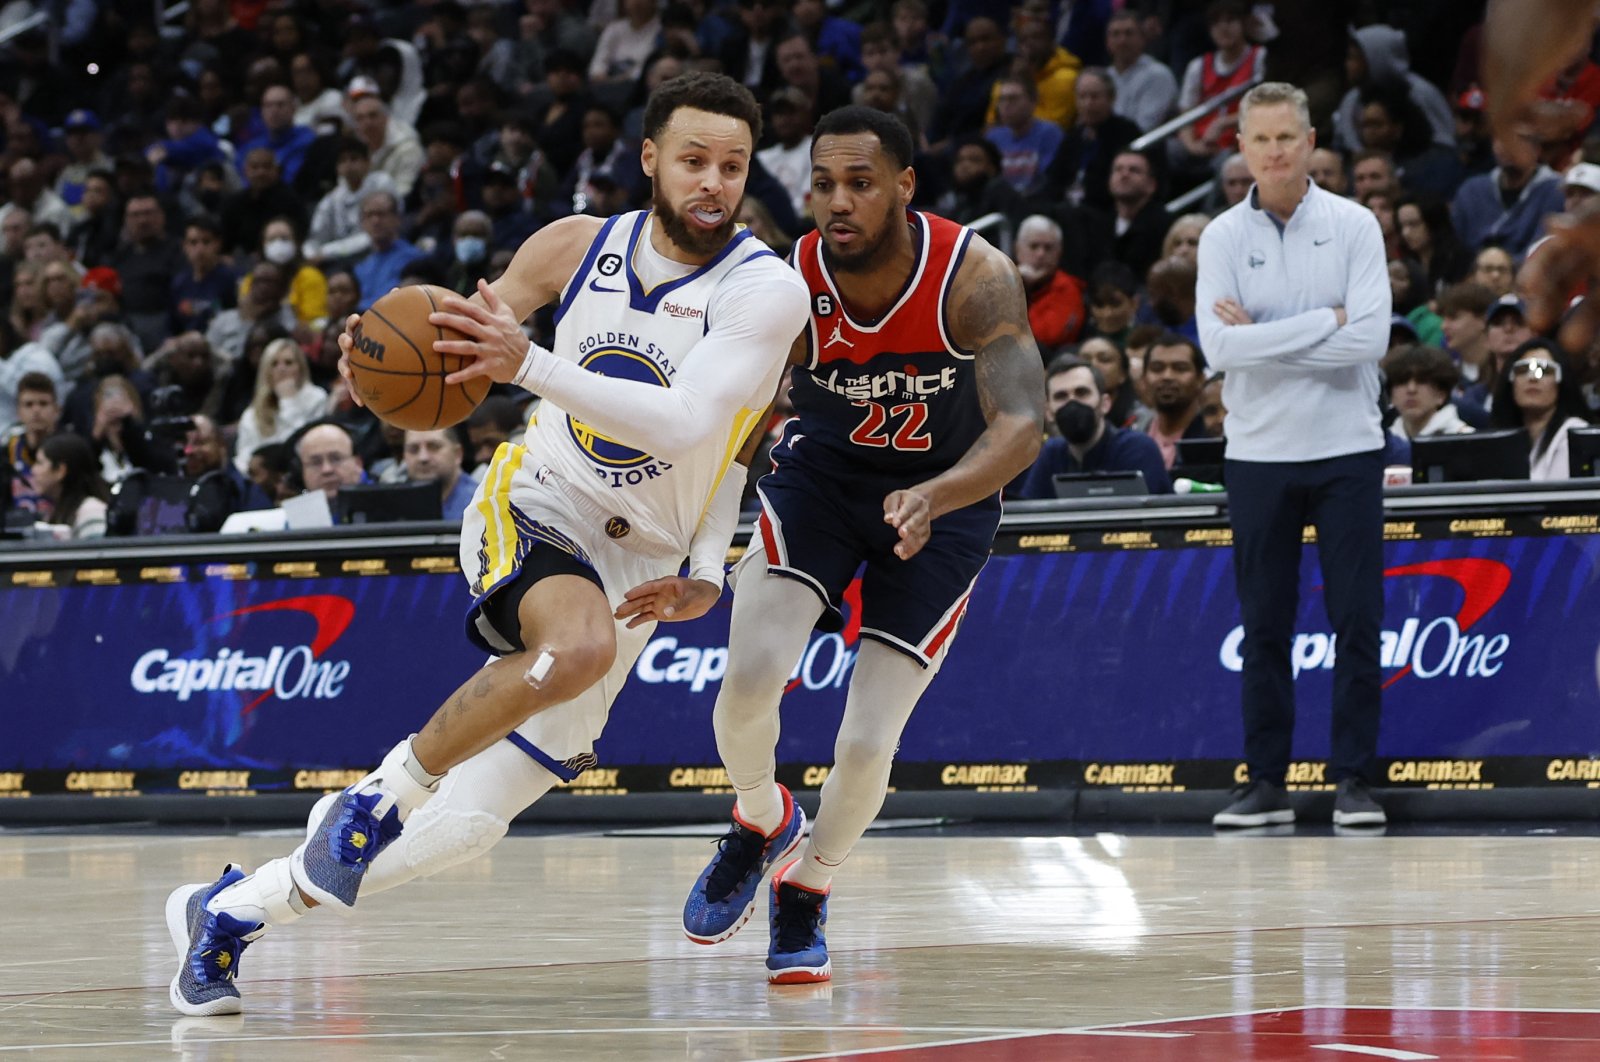 Golden State Warriors guard Stephen Curry (L) drives to the basket as Washington Wizards guard Monte Morris (R) defends in the second quarter at Capital One Arena. Washington, USA, Jan 16, 2023. (Reuters Photo)